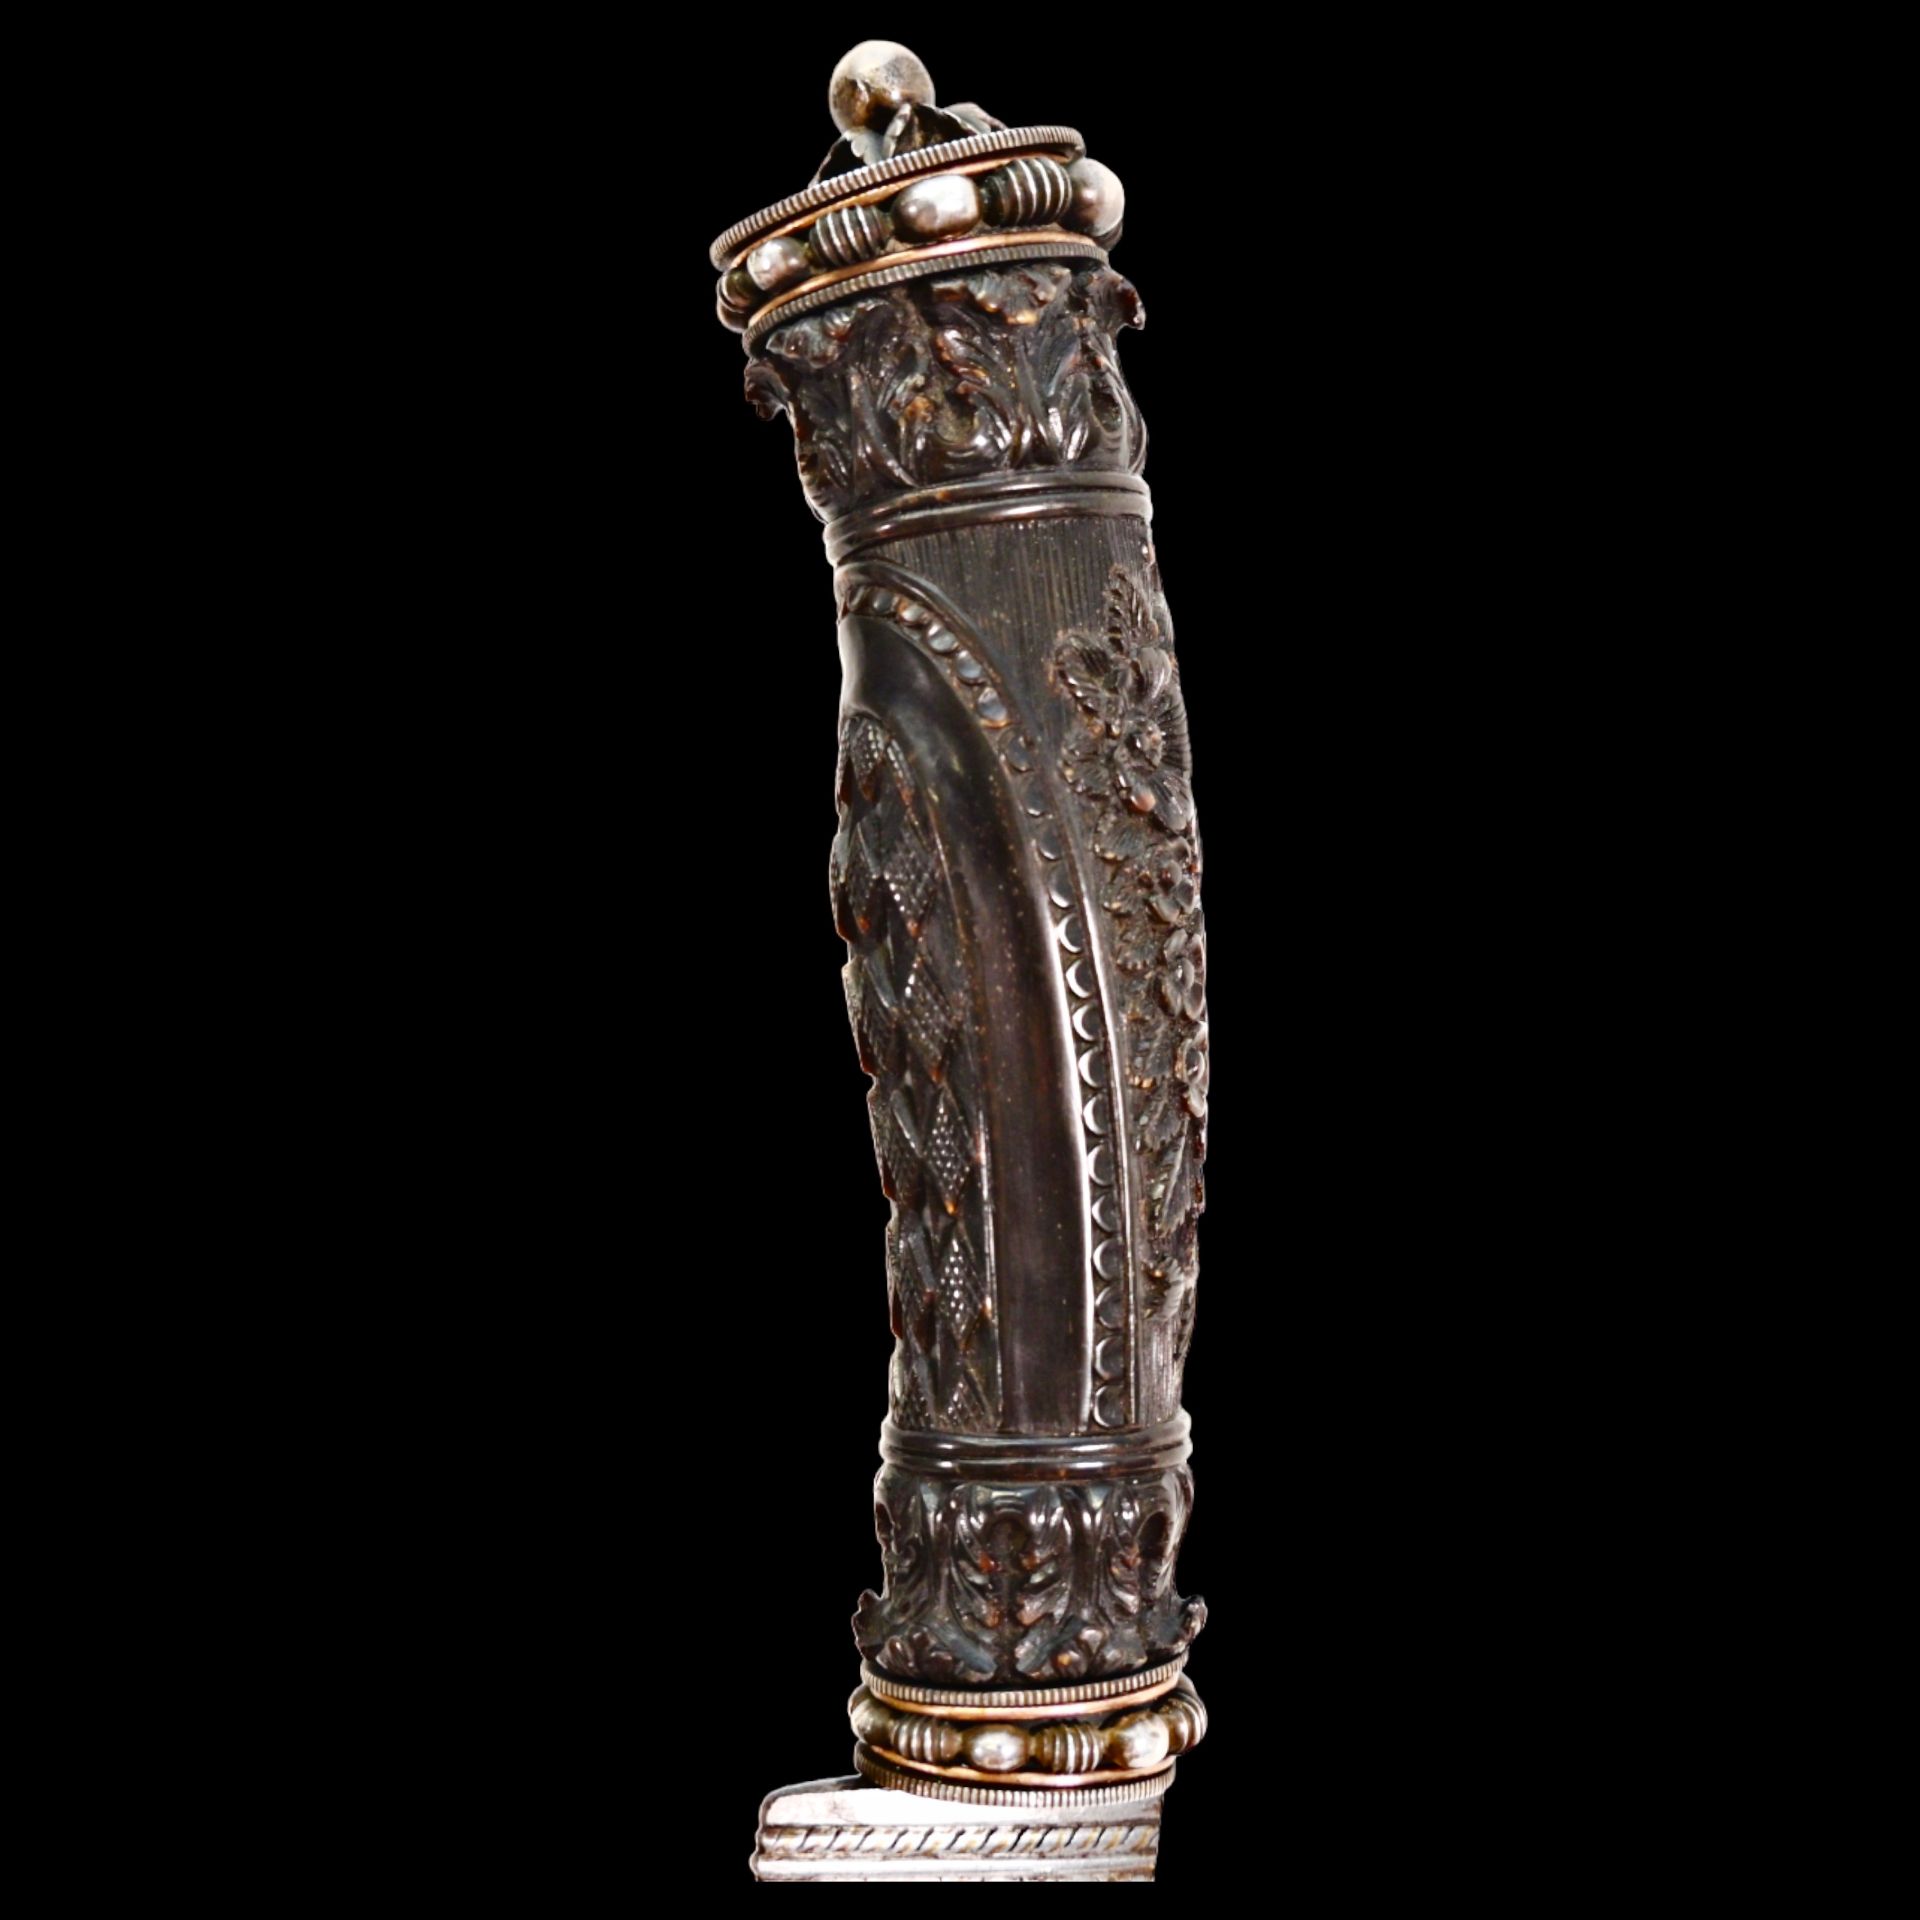 Magnificent, richly decorated knife, Indonesia, first half of the 20th century. - Image 12 of 33